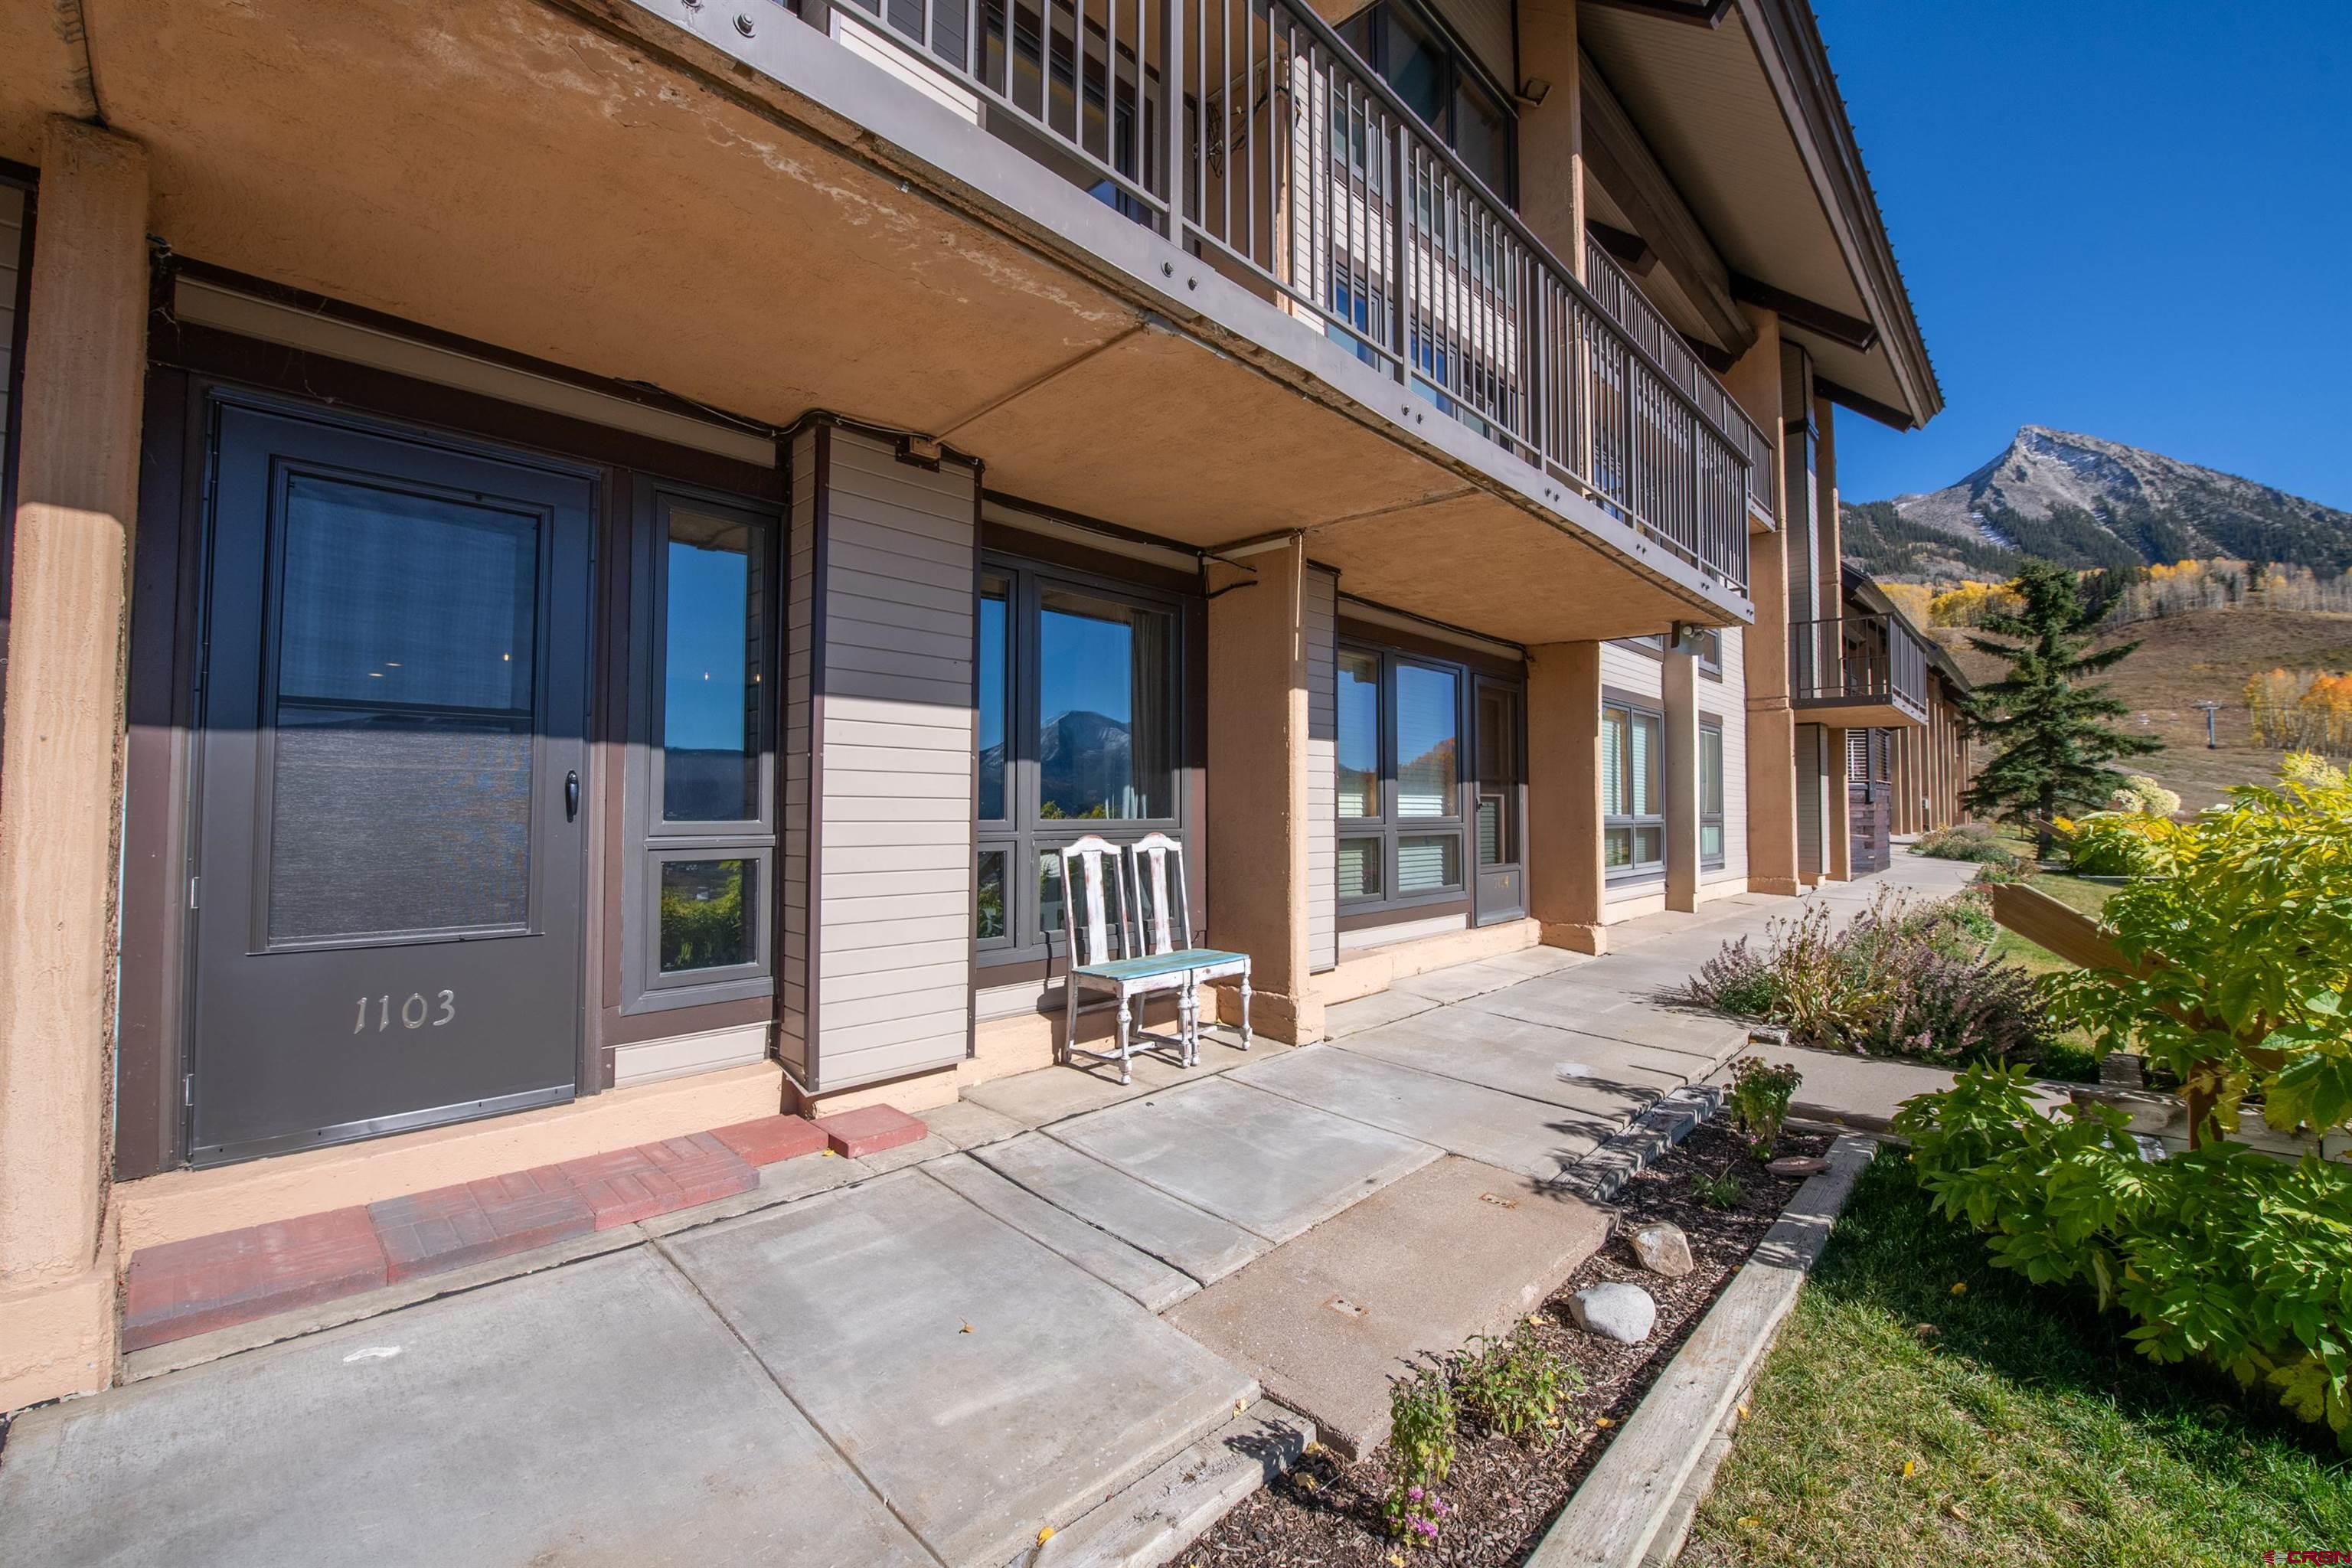 51 Whetstone Road, #1103, Mt. Crested Butte, CO 81225 Listing Photo  3